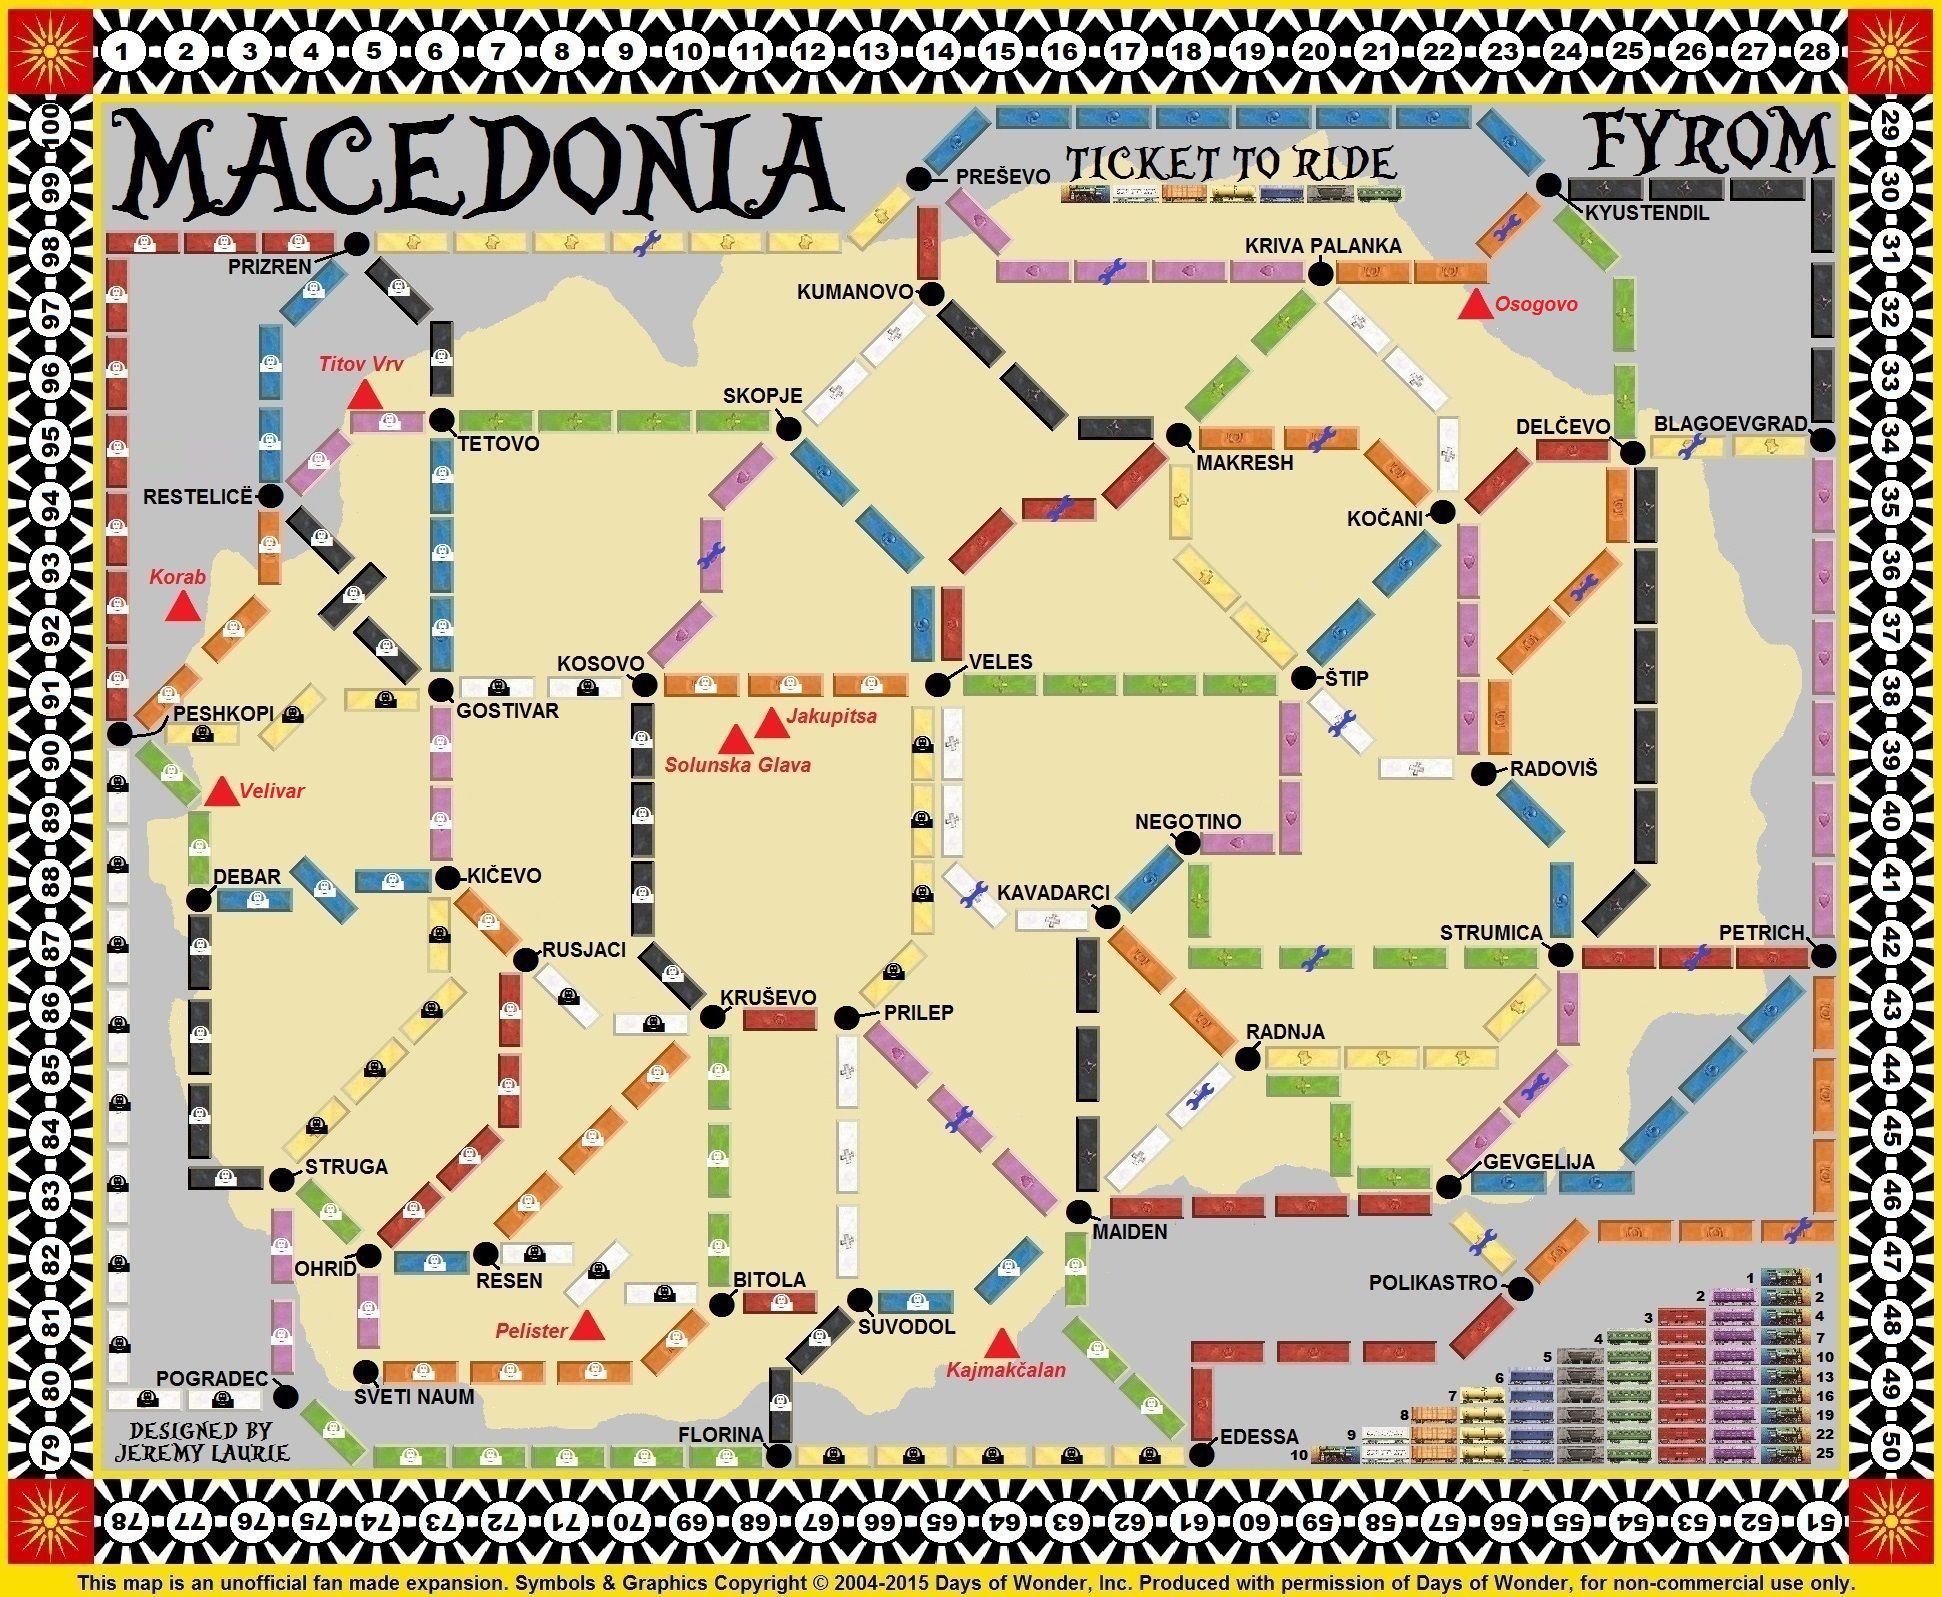 Macedonia (fan expansion for Ticket to Ride)